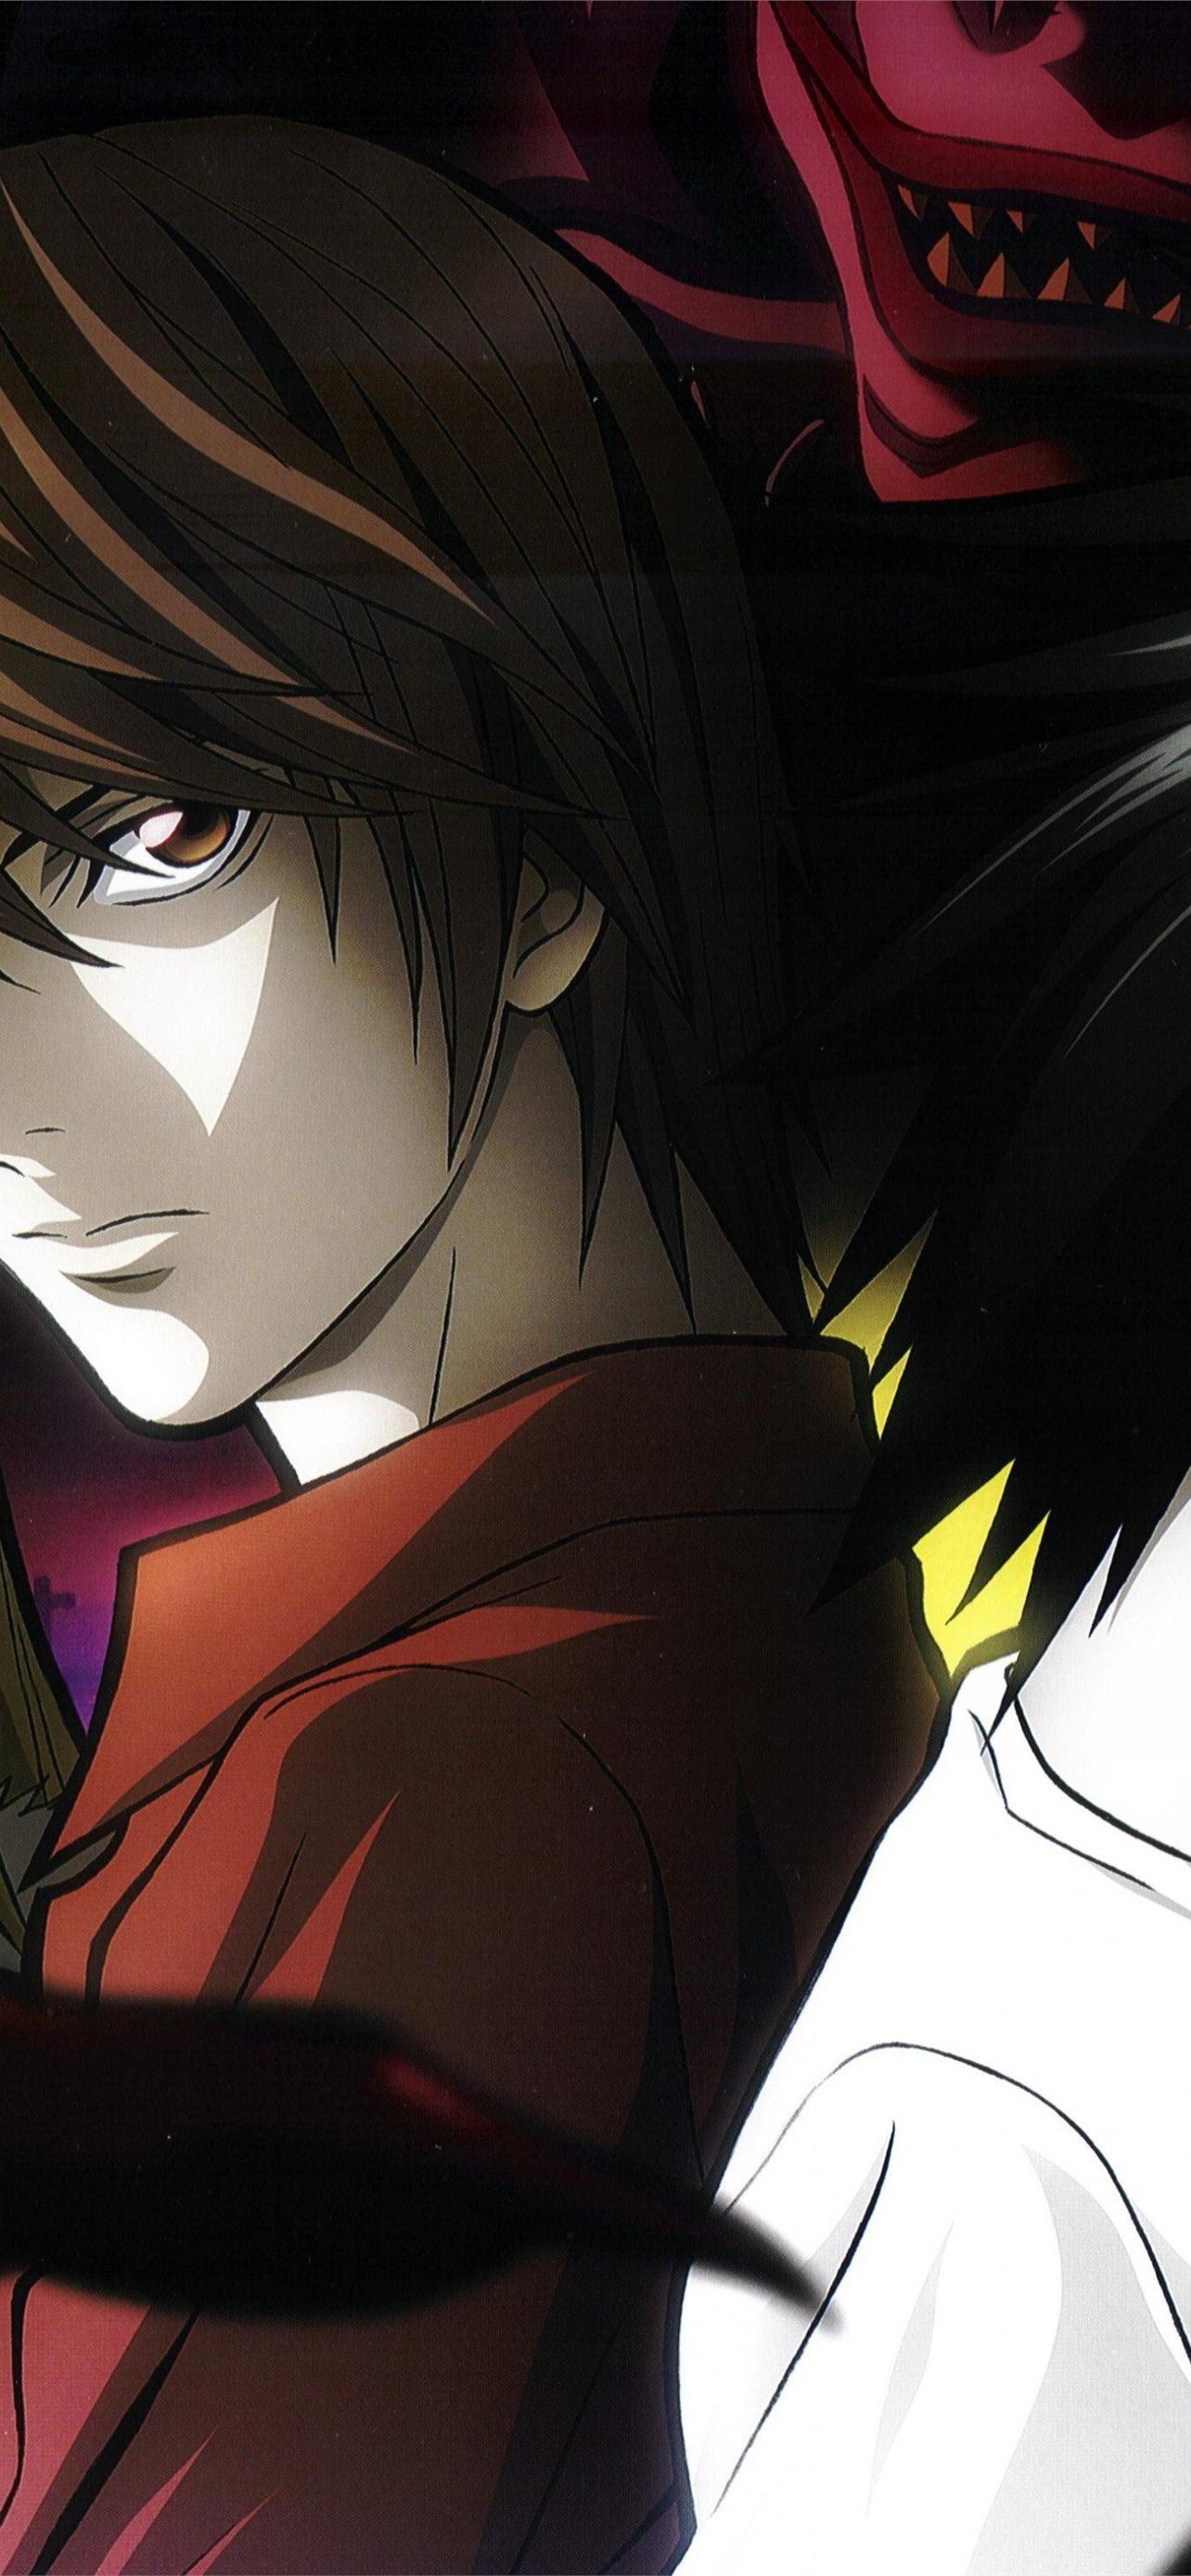 Death Note Lawliet L Yagami Light Amane Misa For S Iphone Wallpapers Free Download